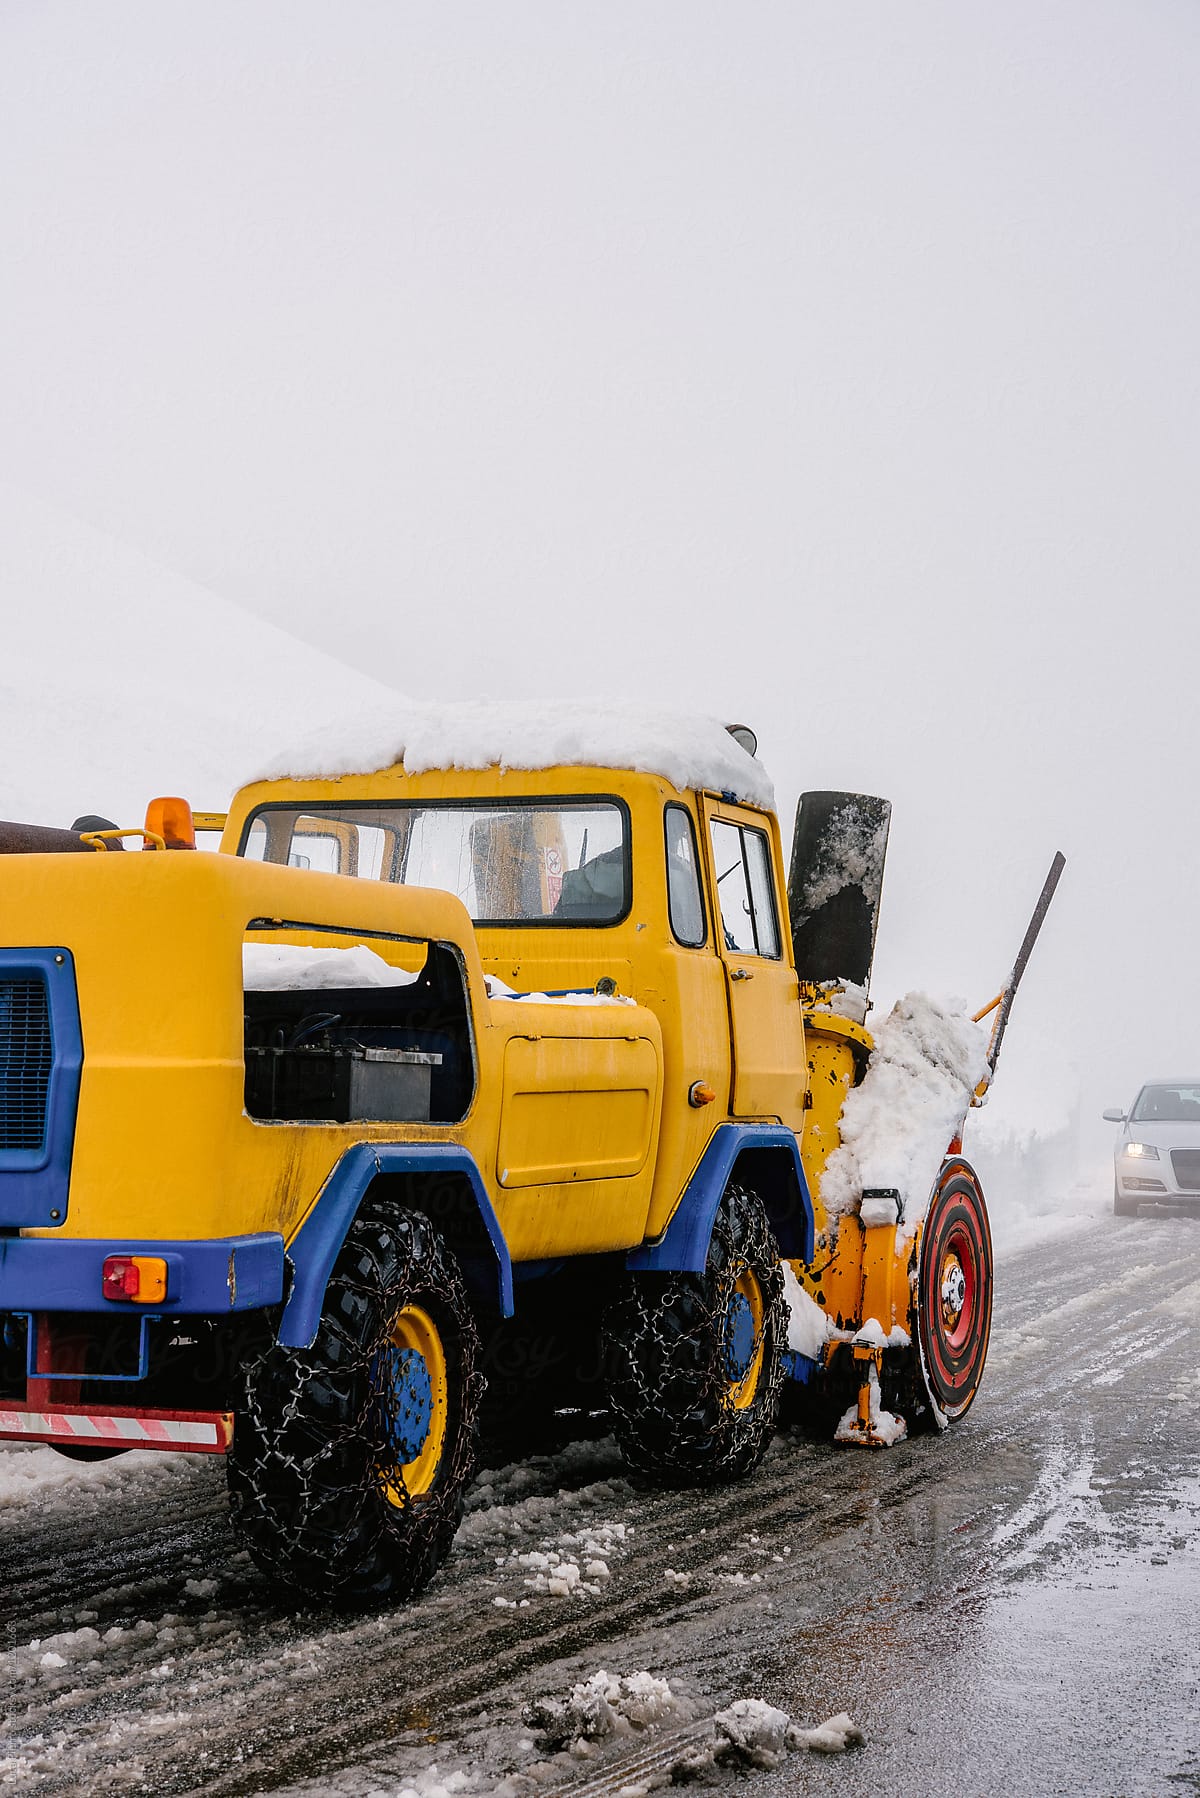 A snow plow  tractor clearing the snow on the roads from a winter storm